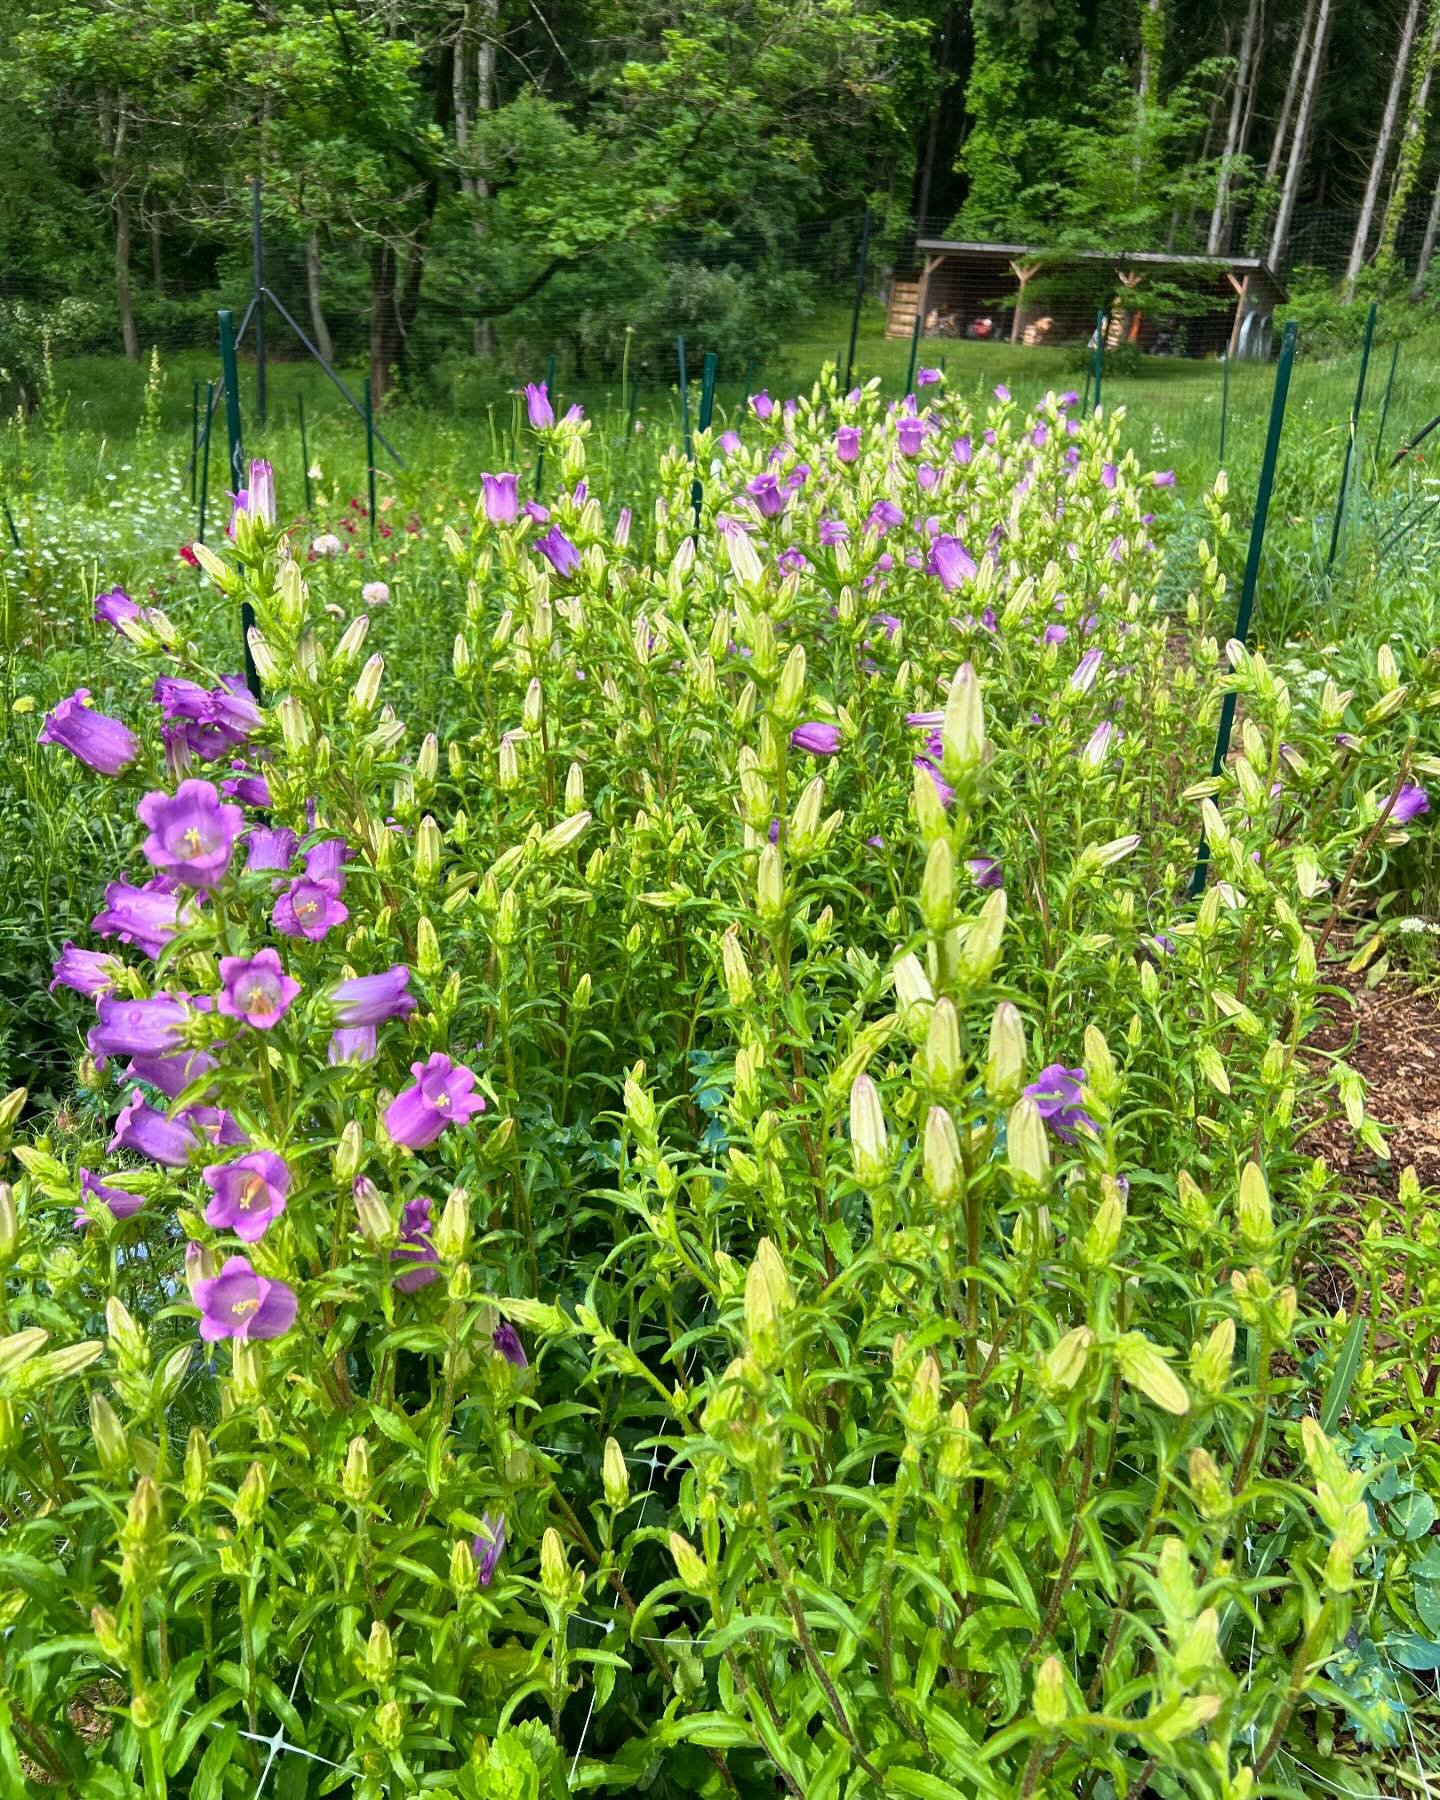 All of the Hardy Annuals are starting to pop, and I spent yesterday in the fields harvesting as fast as I could!

Our Campanula crop is over the top. I planted plugs from @farmerbaileyplugs last fall, and they overwintered beautifully. Some got nibbl